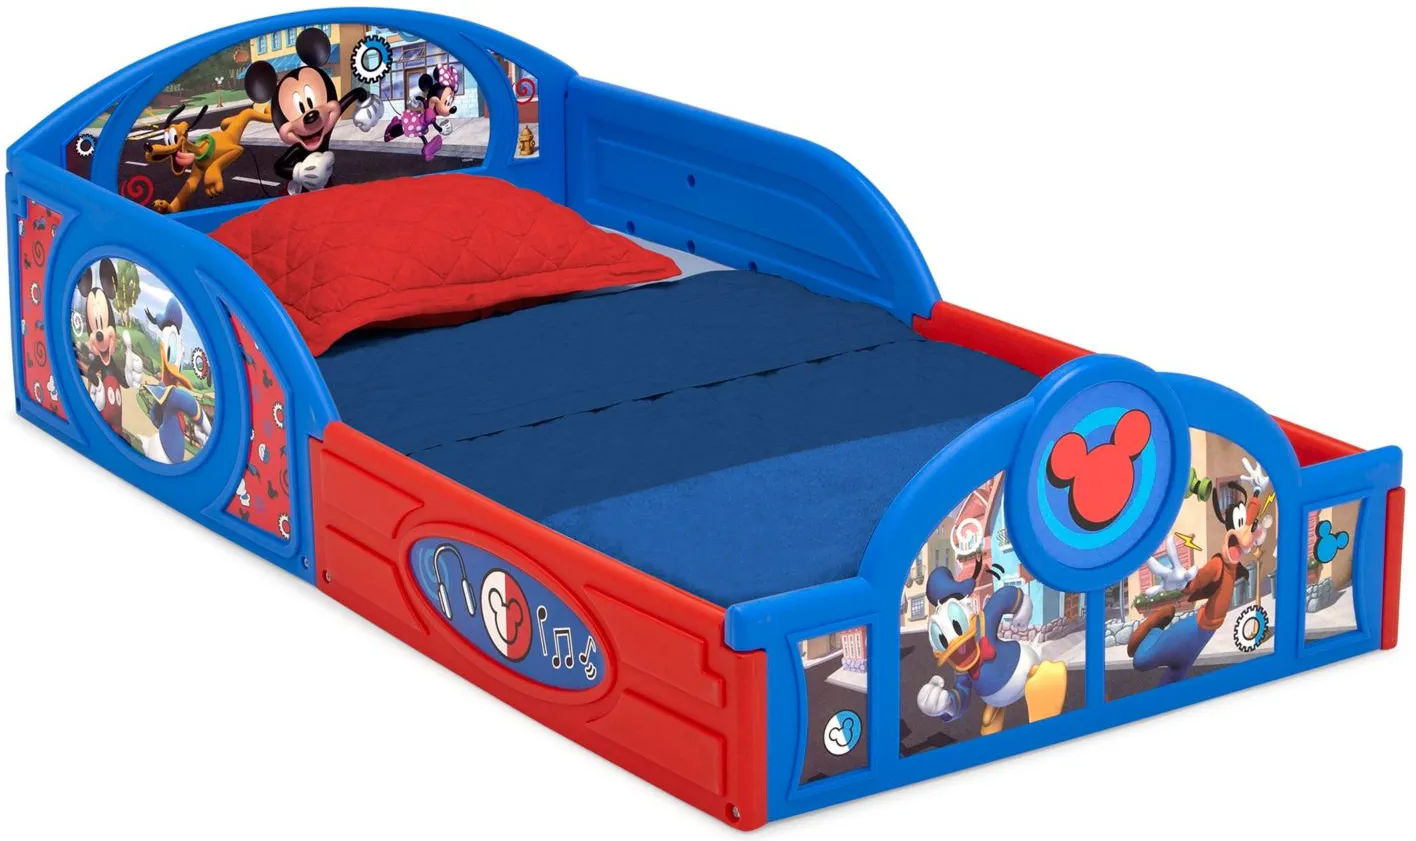 Disney Mickey Mouse Sleep and Play Toddler Bed with Attached Guardrails by Delta Children in Blue/Mickey Mouse by Delta Children